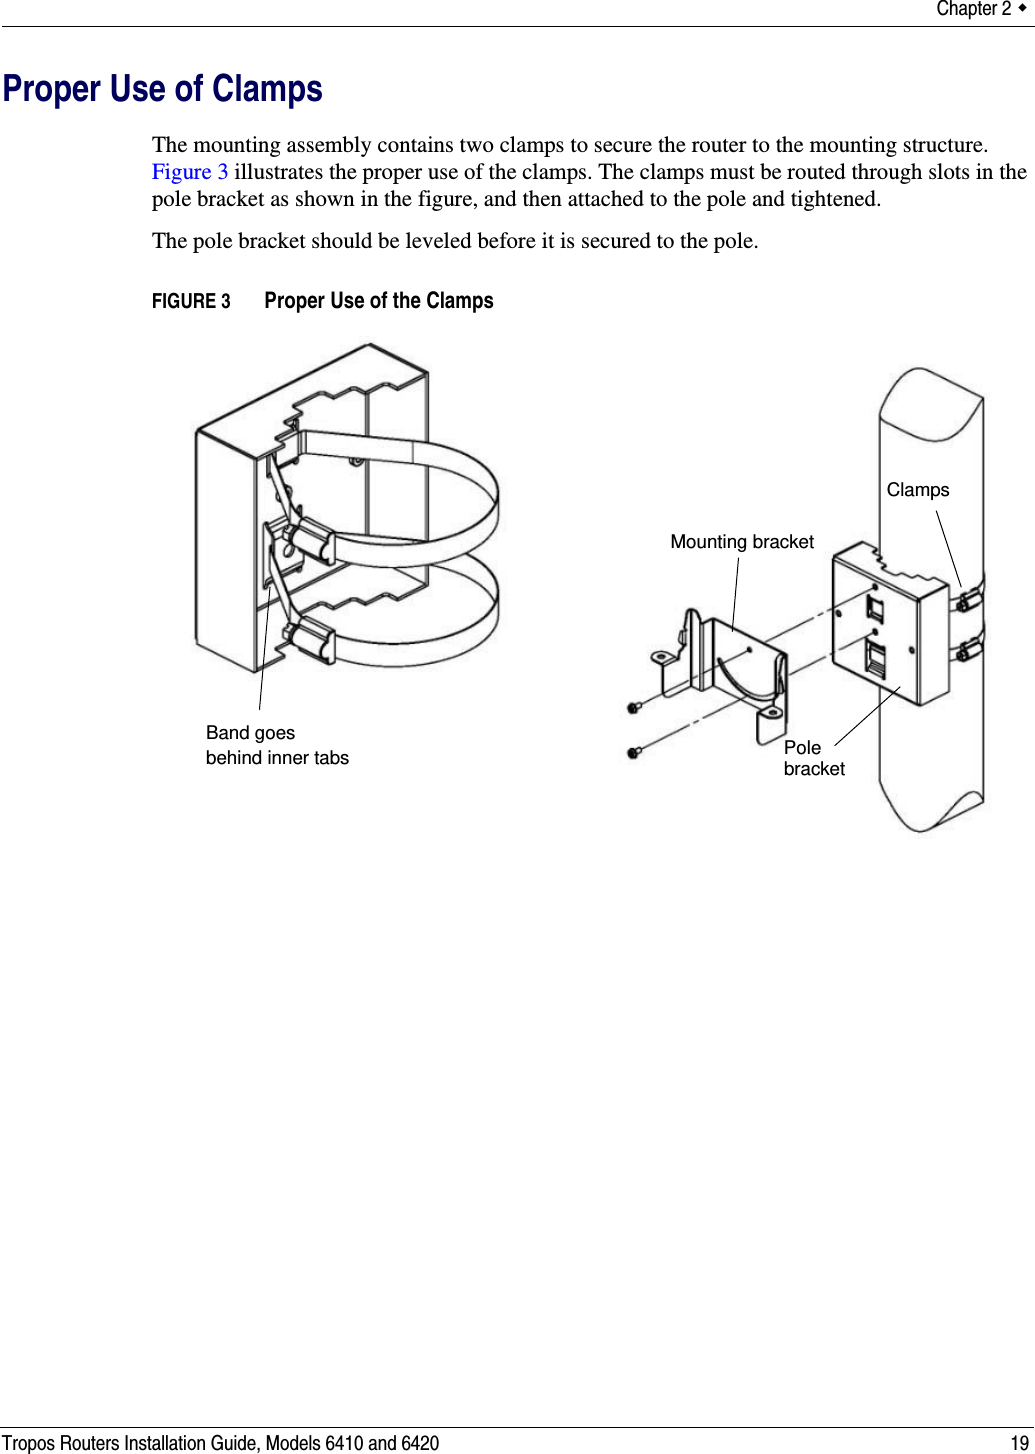 Chapter 2  Tropos Routers Installation Guide, Models 6410 and 6420 19Proper Use of ClampsThe mounting assembly contains two clamps to secure the router to the mounting structure. Figure 3 illustrates the proper use of the clamps. The clamps must be routed through slots in the pole bracket as shown in the figure, and then attached to the pole and tightened.The pole bracket should be leveled before it is secured to the pole.FIGURE 3   Proper Use of the ClampsBand goes behind inner tabsClampsPole Mounting bracketbracket